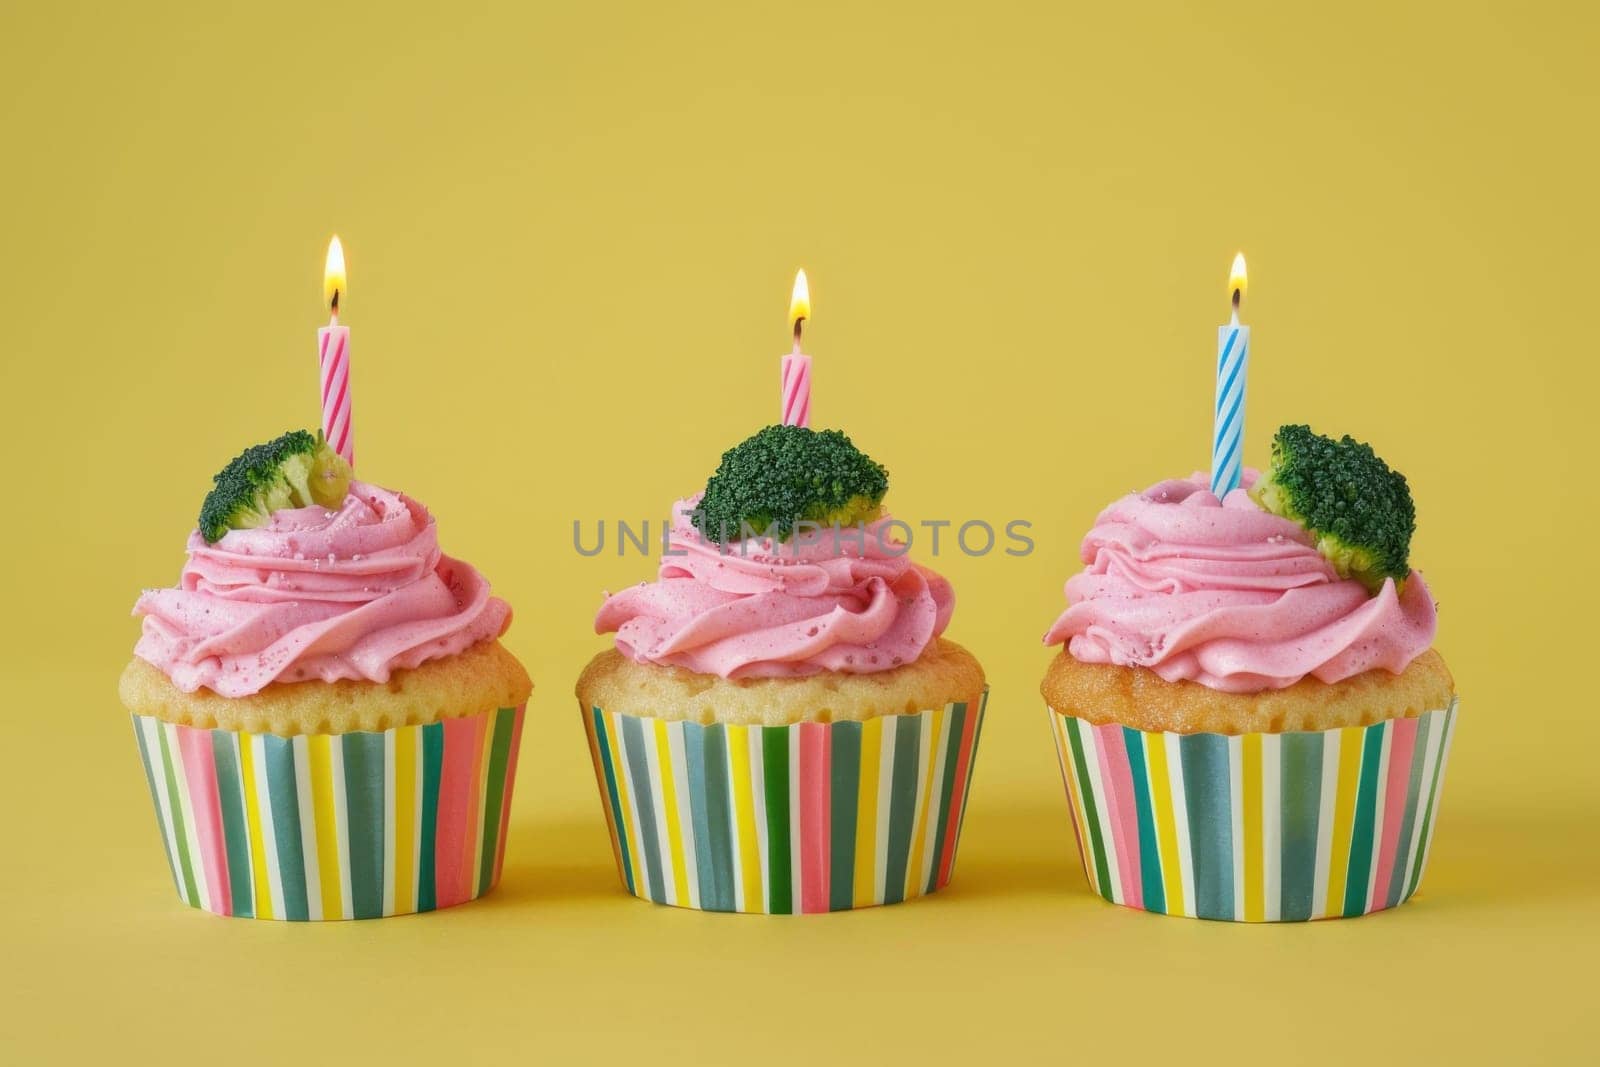 Celebratory pink cupcakes with candles on a vibrant yellow background for festive occasions